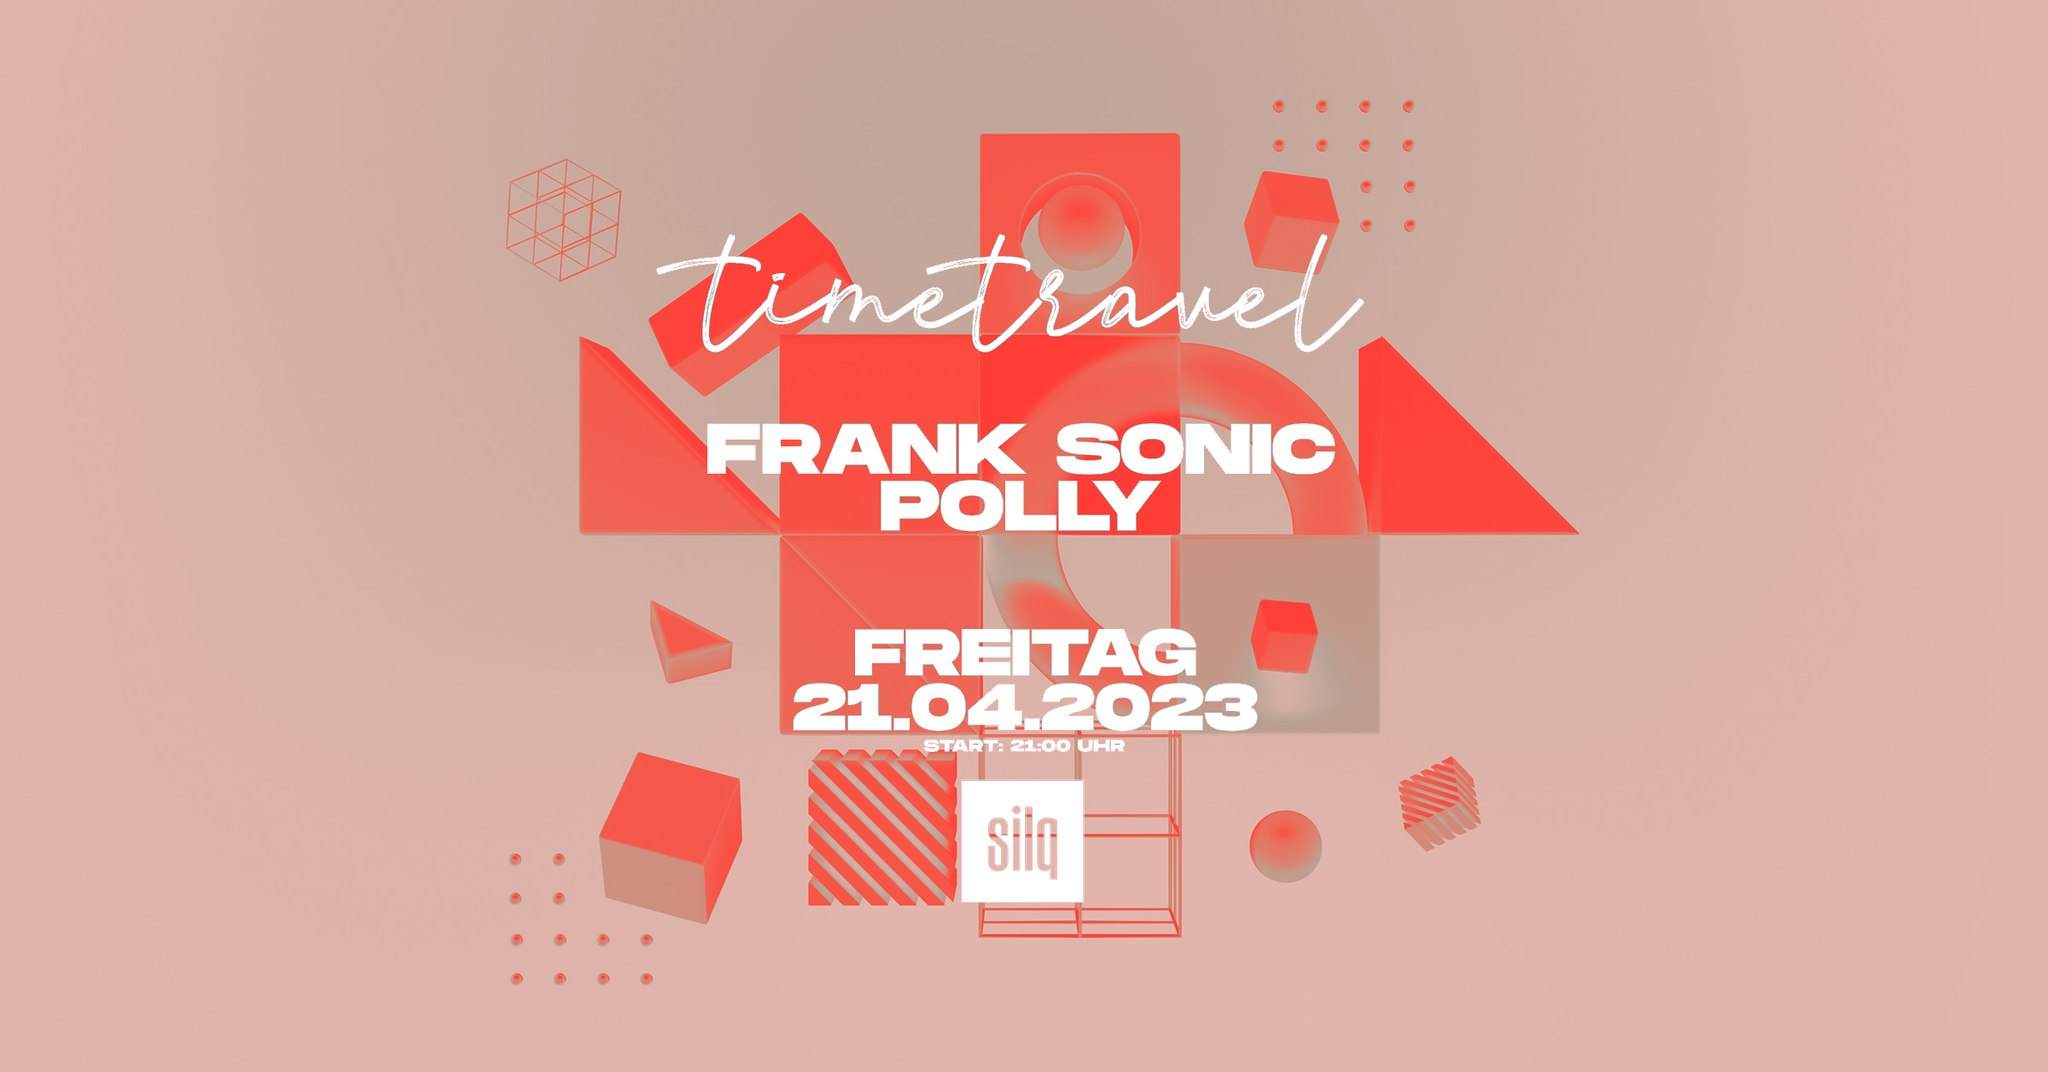 Timetravel with Frank Sonic, Polly - フライヤー表